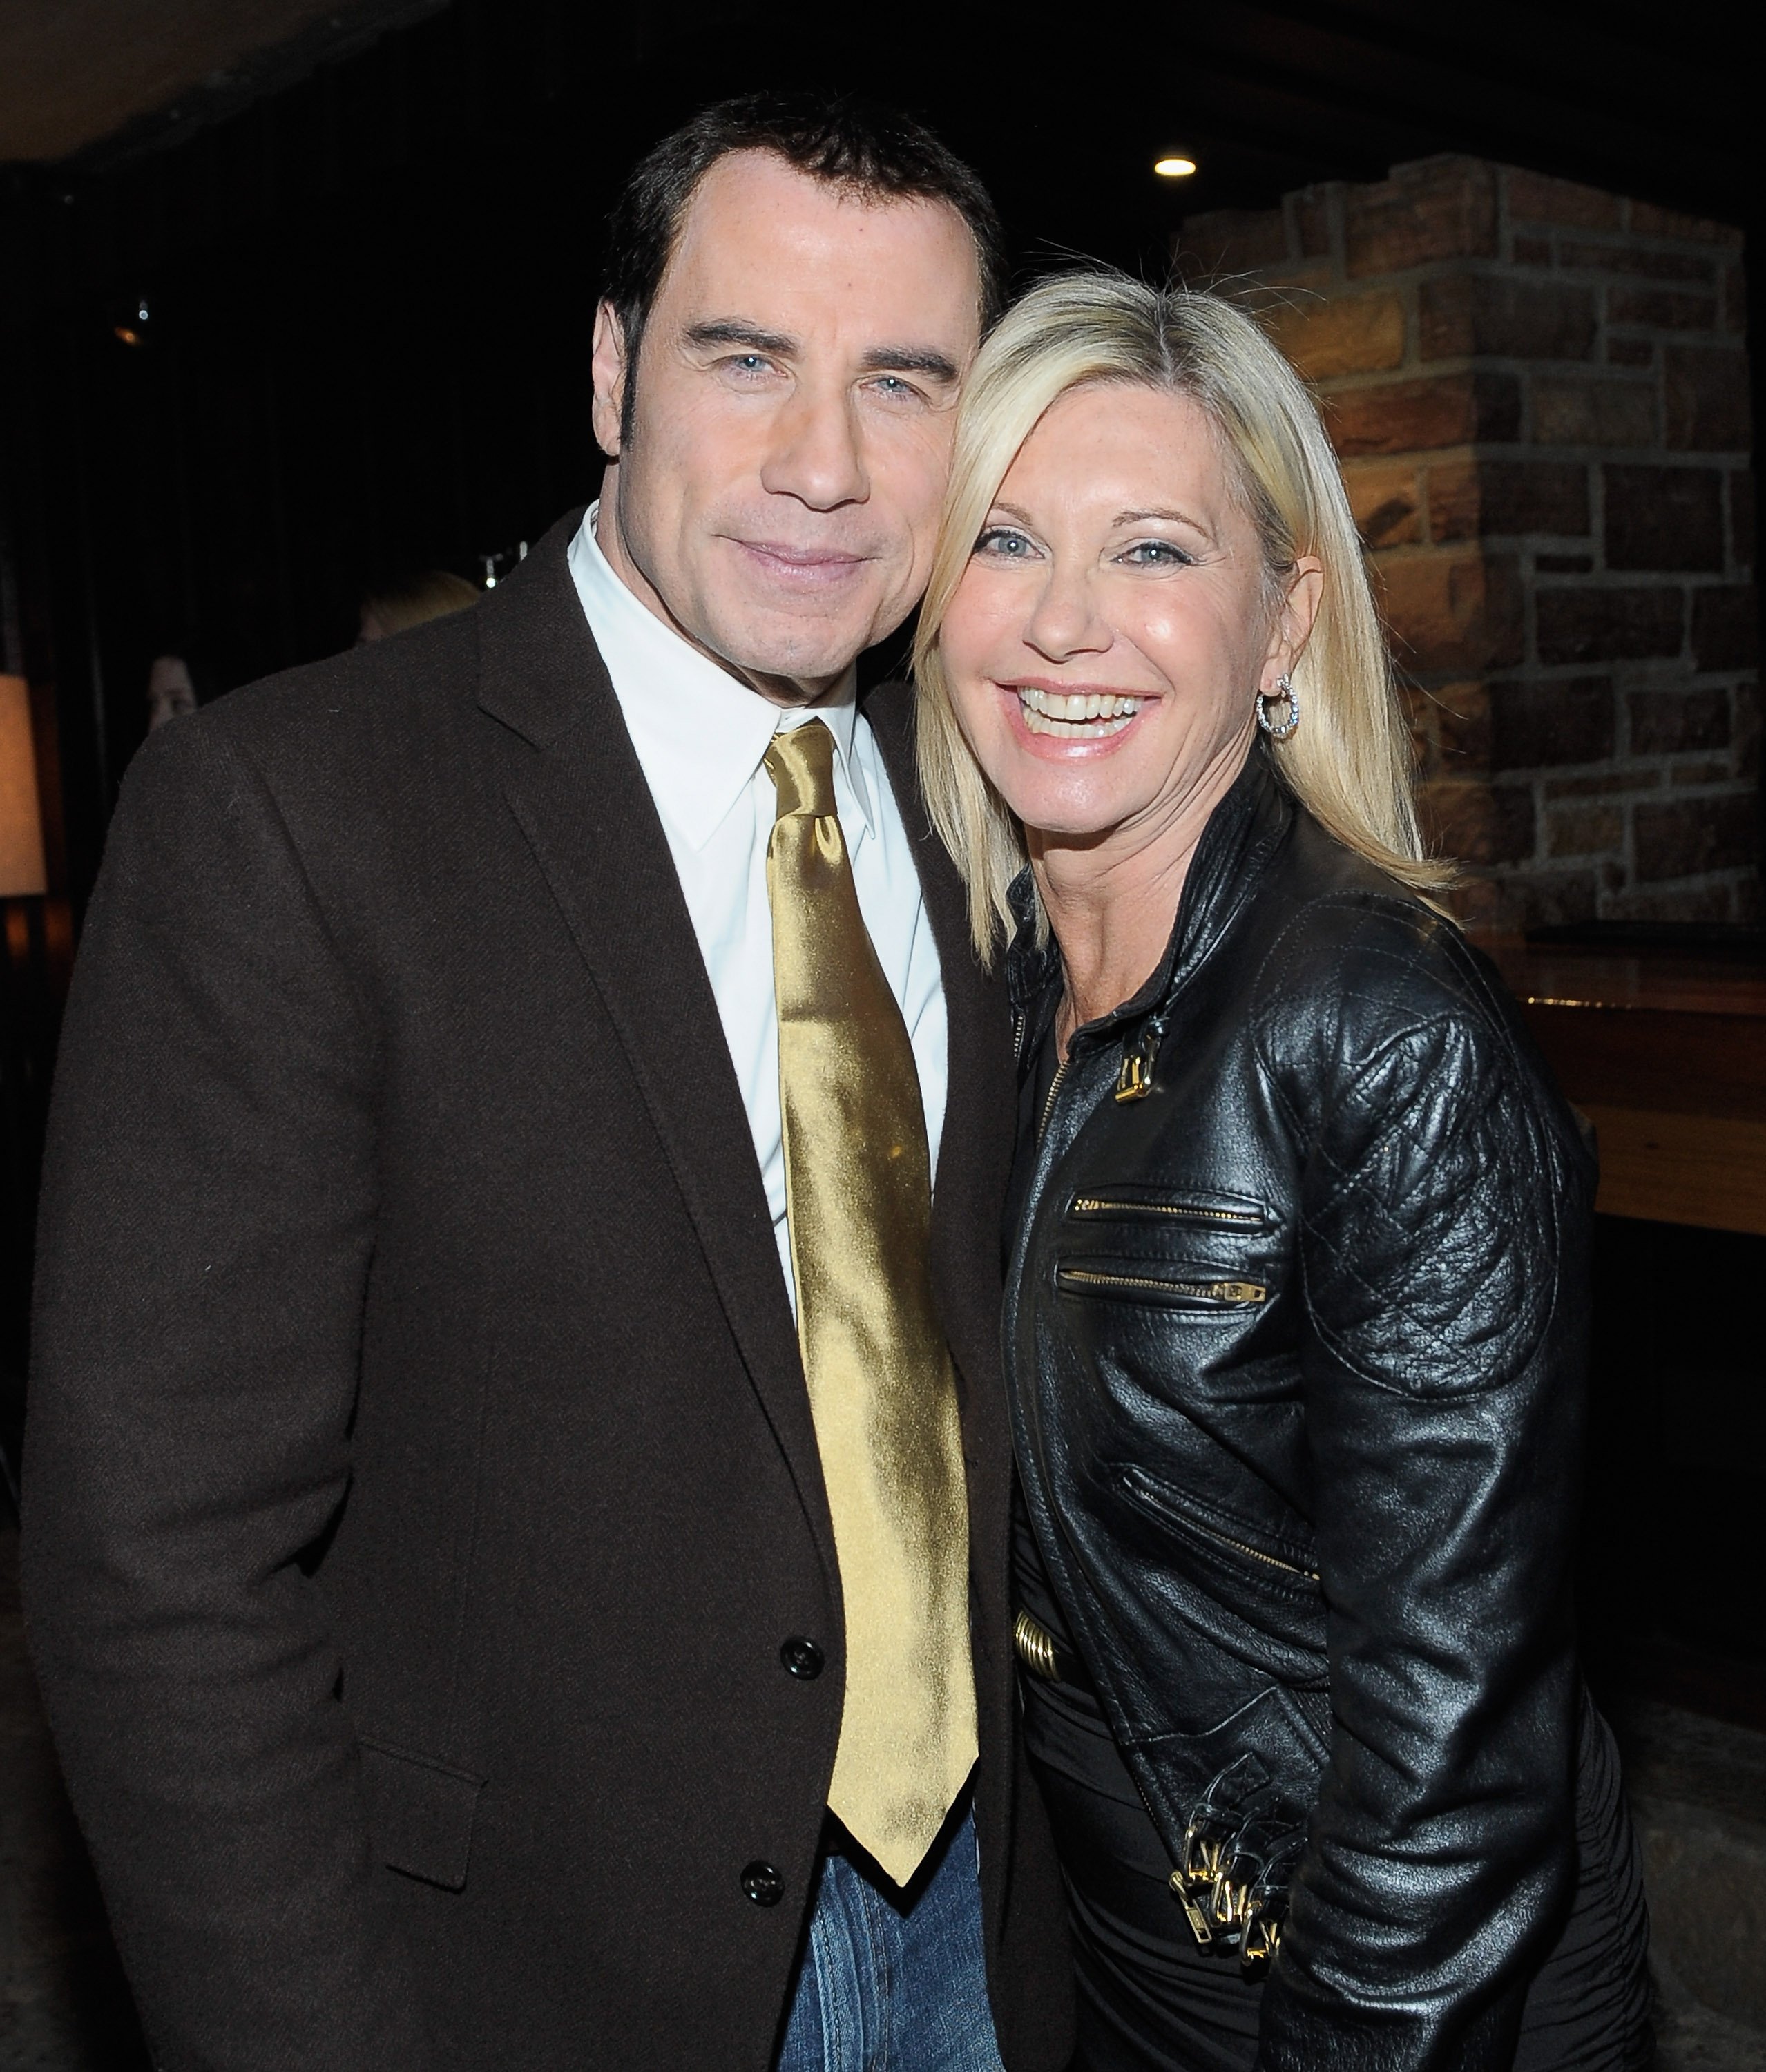 John Travolta and Olivia Newton-John attended the Qantas Airways Spirit of Australia Party at the Hollywood Roosevelt Hotel on January 12, 2012, in Hollywood, California. | Source: Getty Images